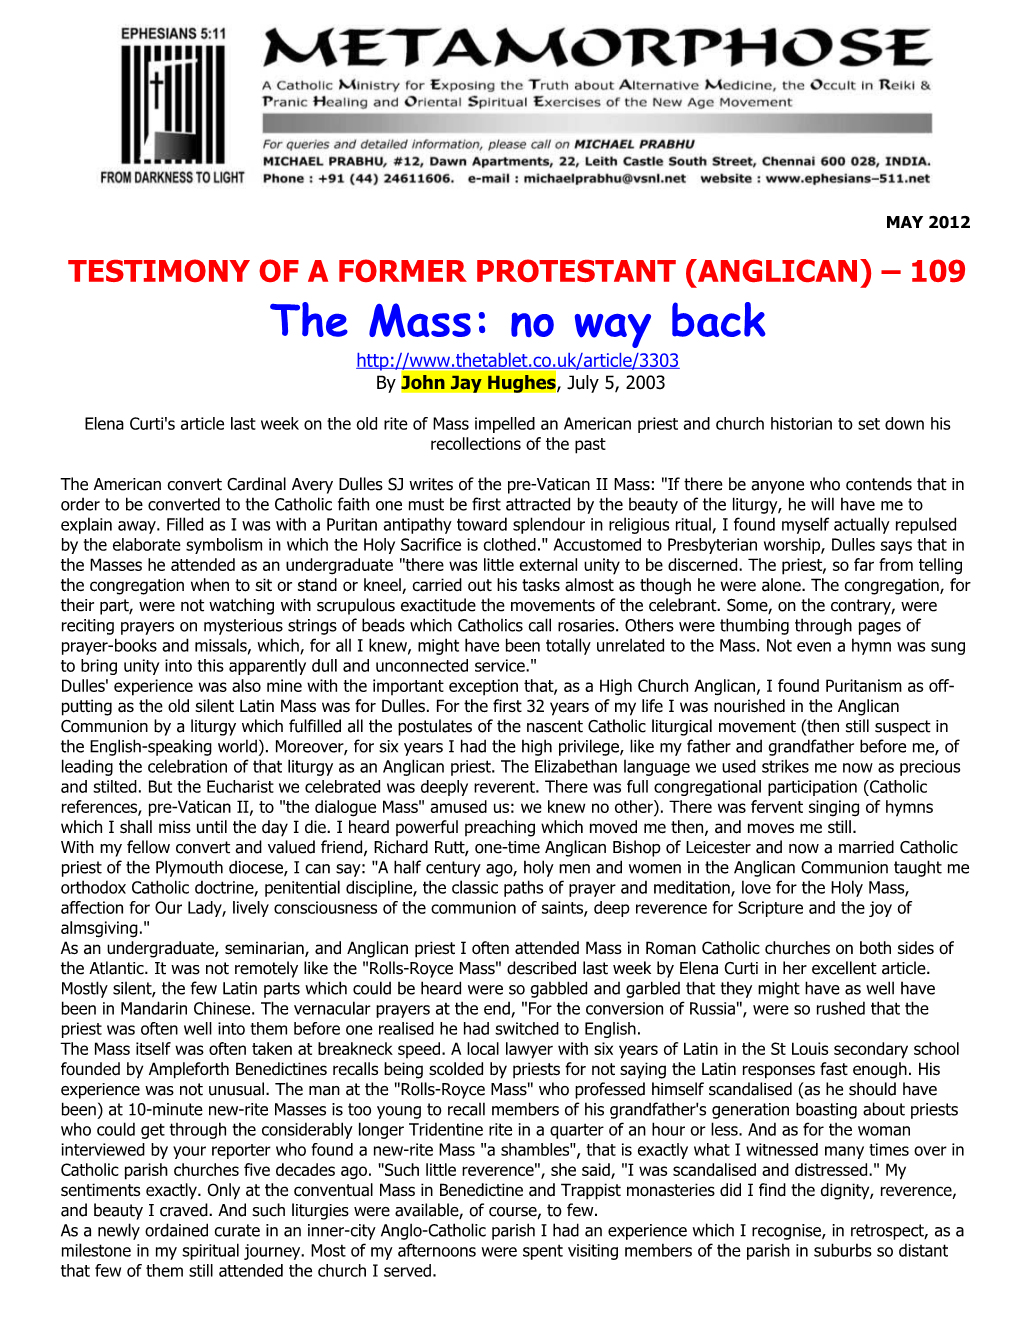 Testimony of a Former Protestant (Anglican) 109